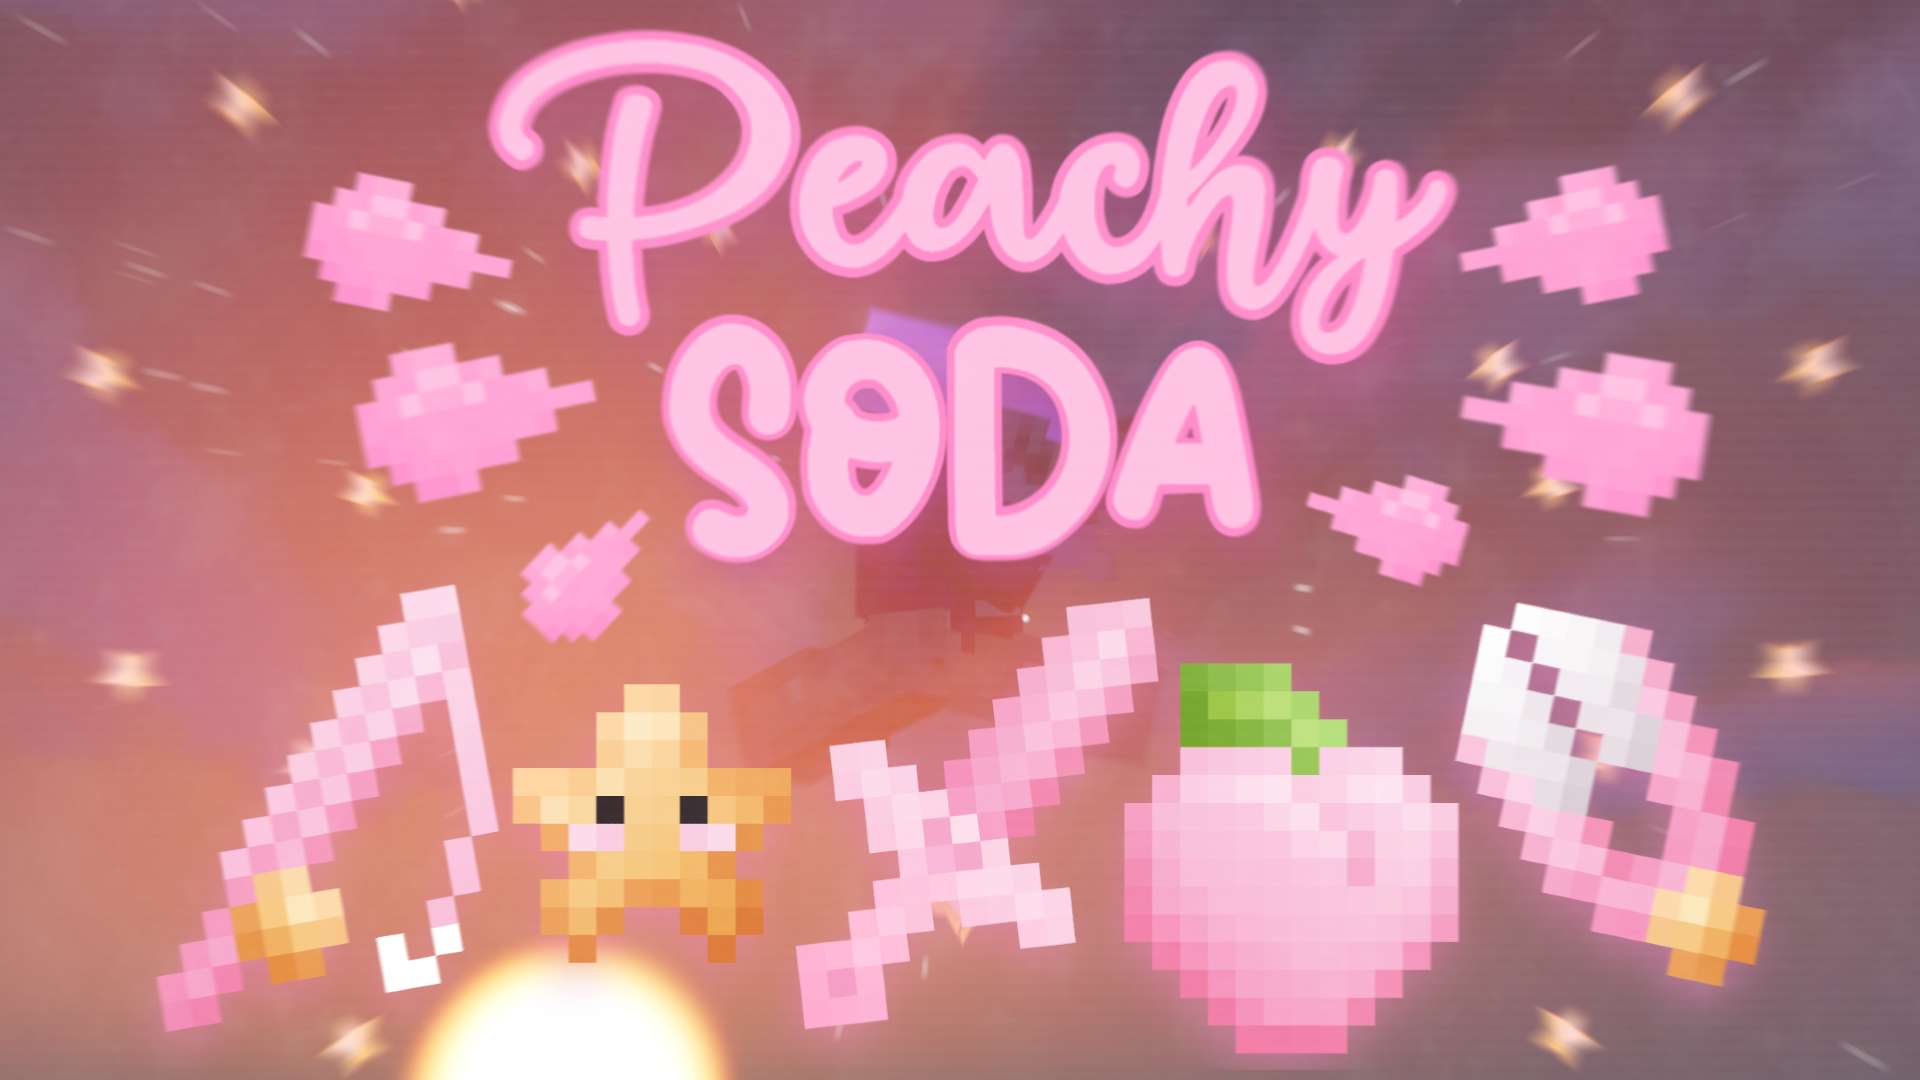 Peachy Soda 16 by Juuliet on PvPRP